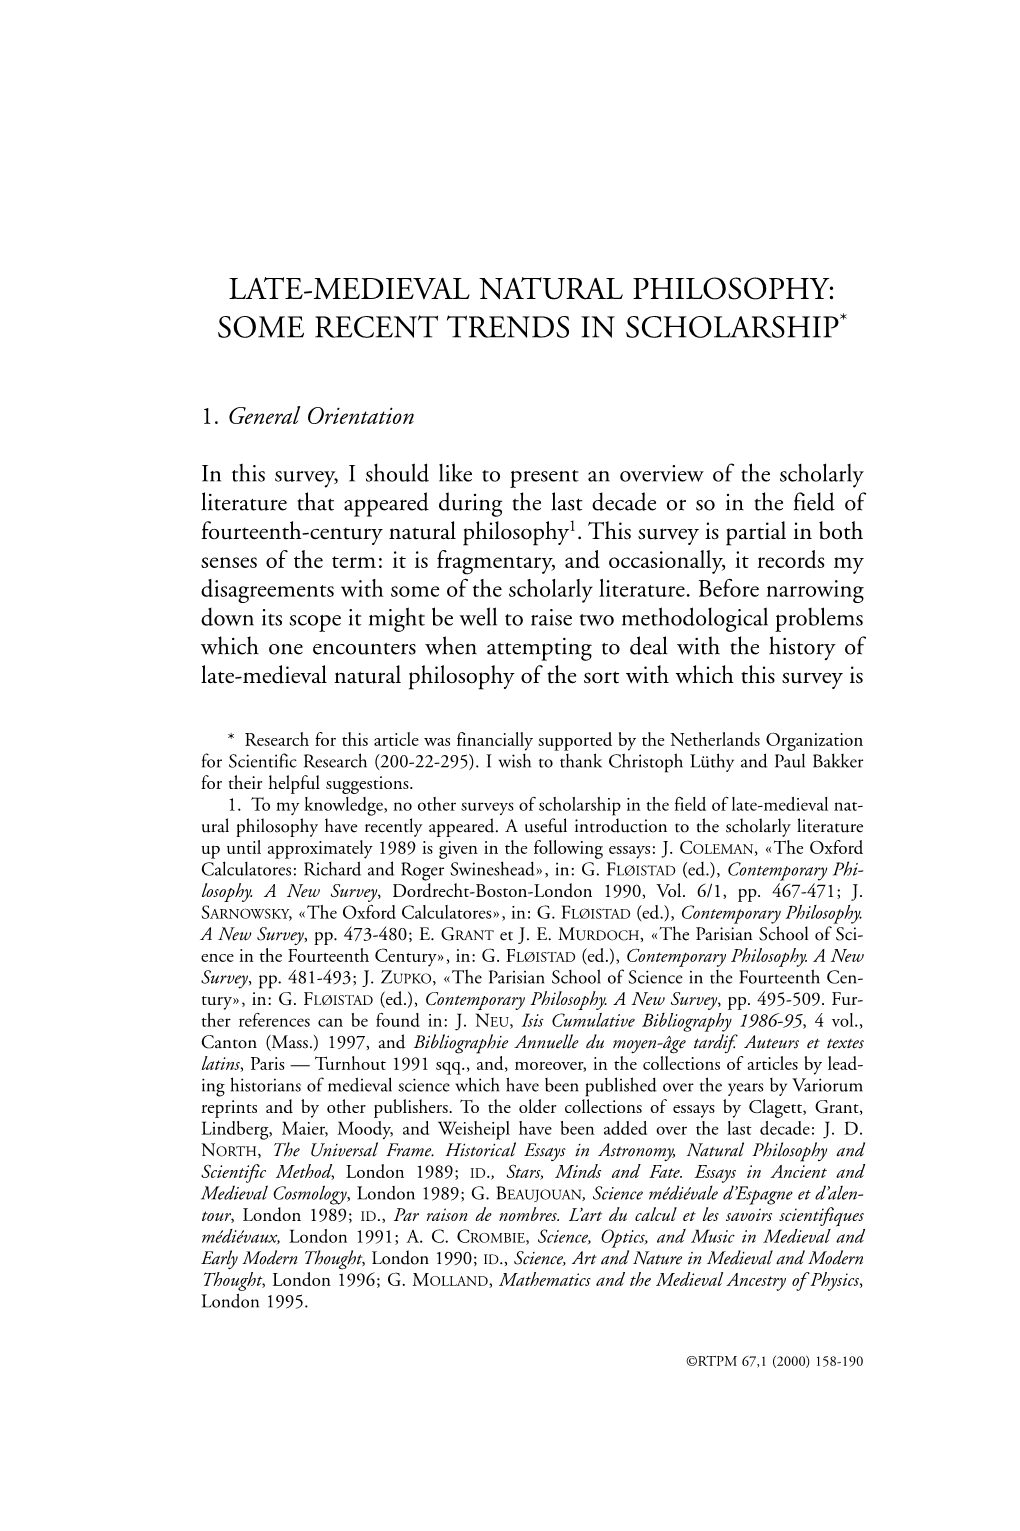 Late-Medieval Natural Philosophy: Some Recent Trends in Scholarship*